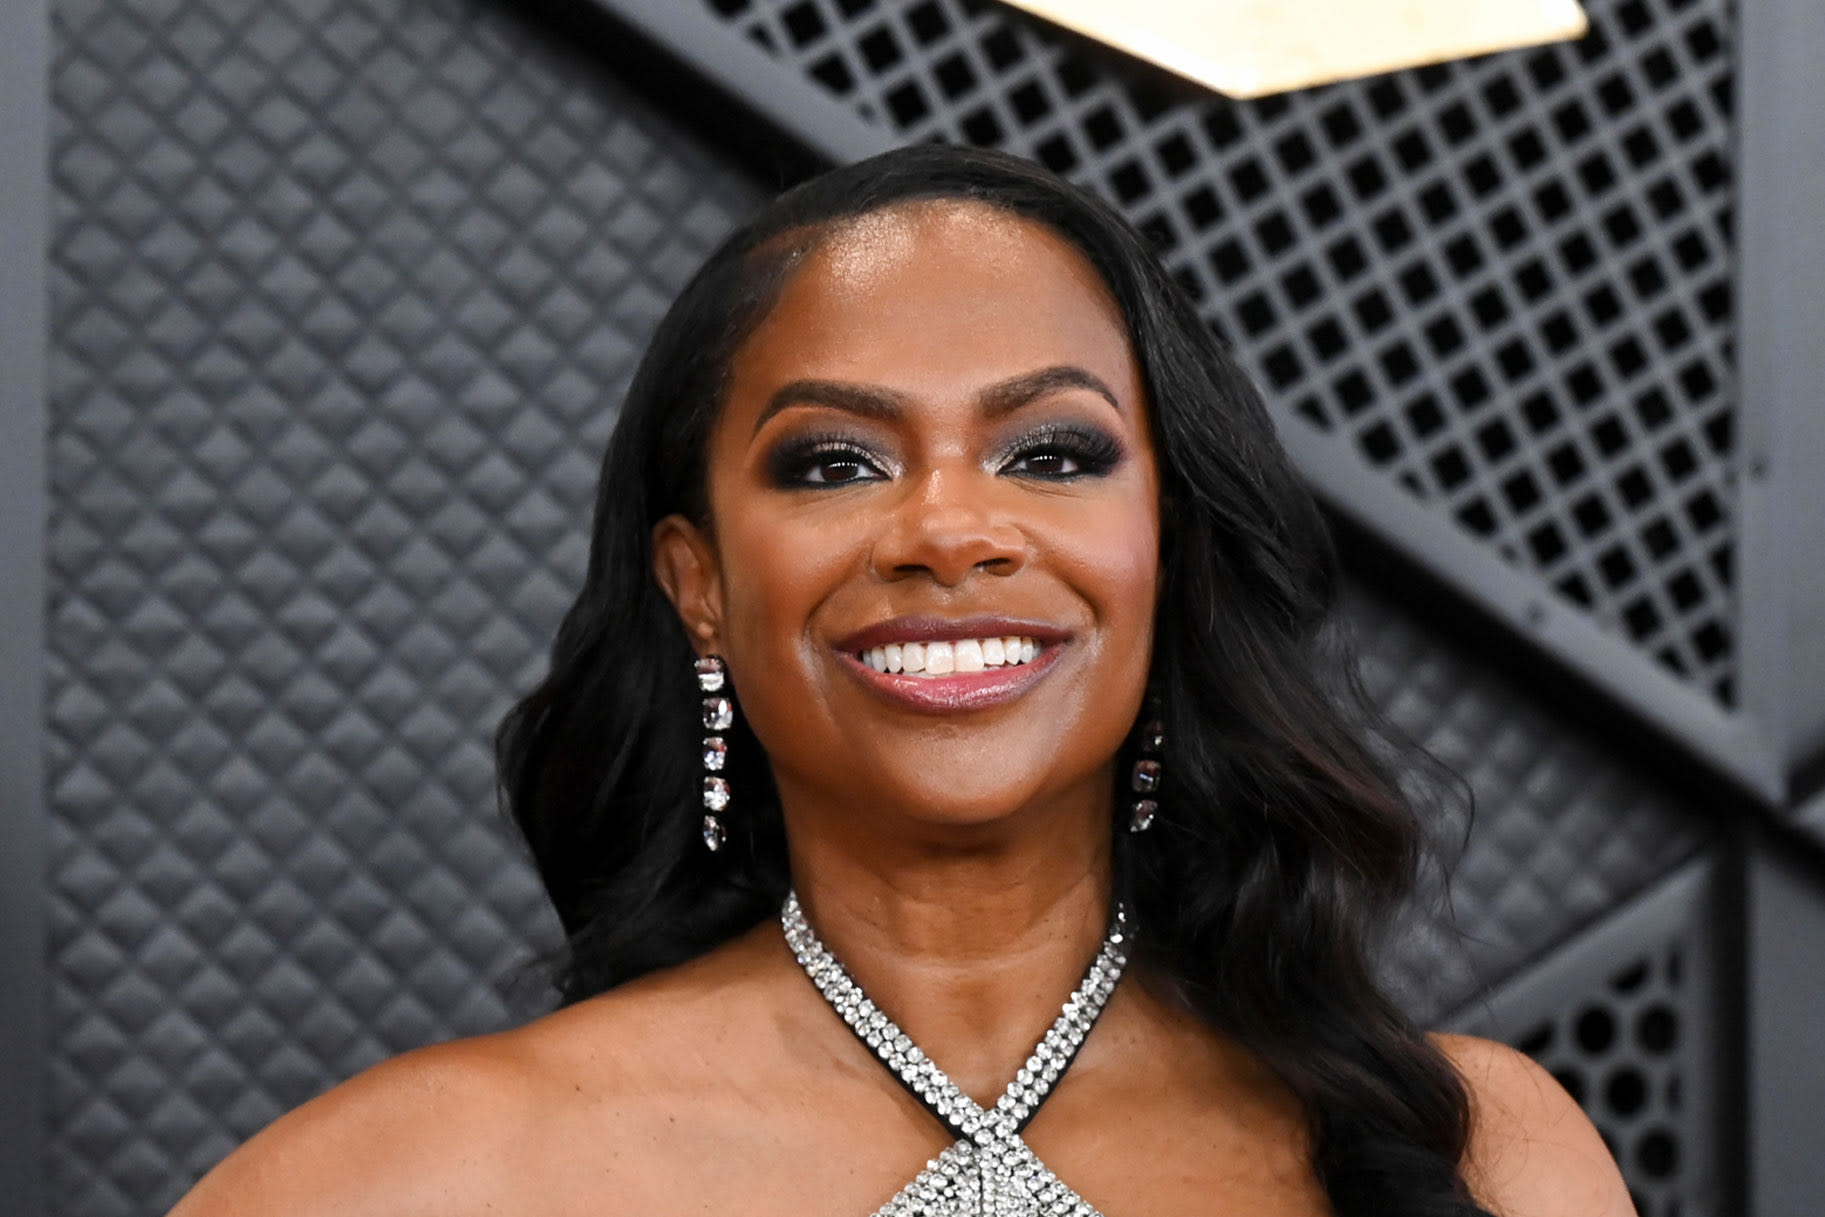 Kandi Burruss Gets Real About Her Weight Loss Journey: "It Makes You Depressed" | Bravo TV Official Site